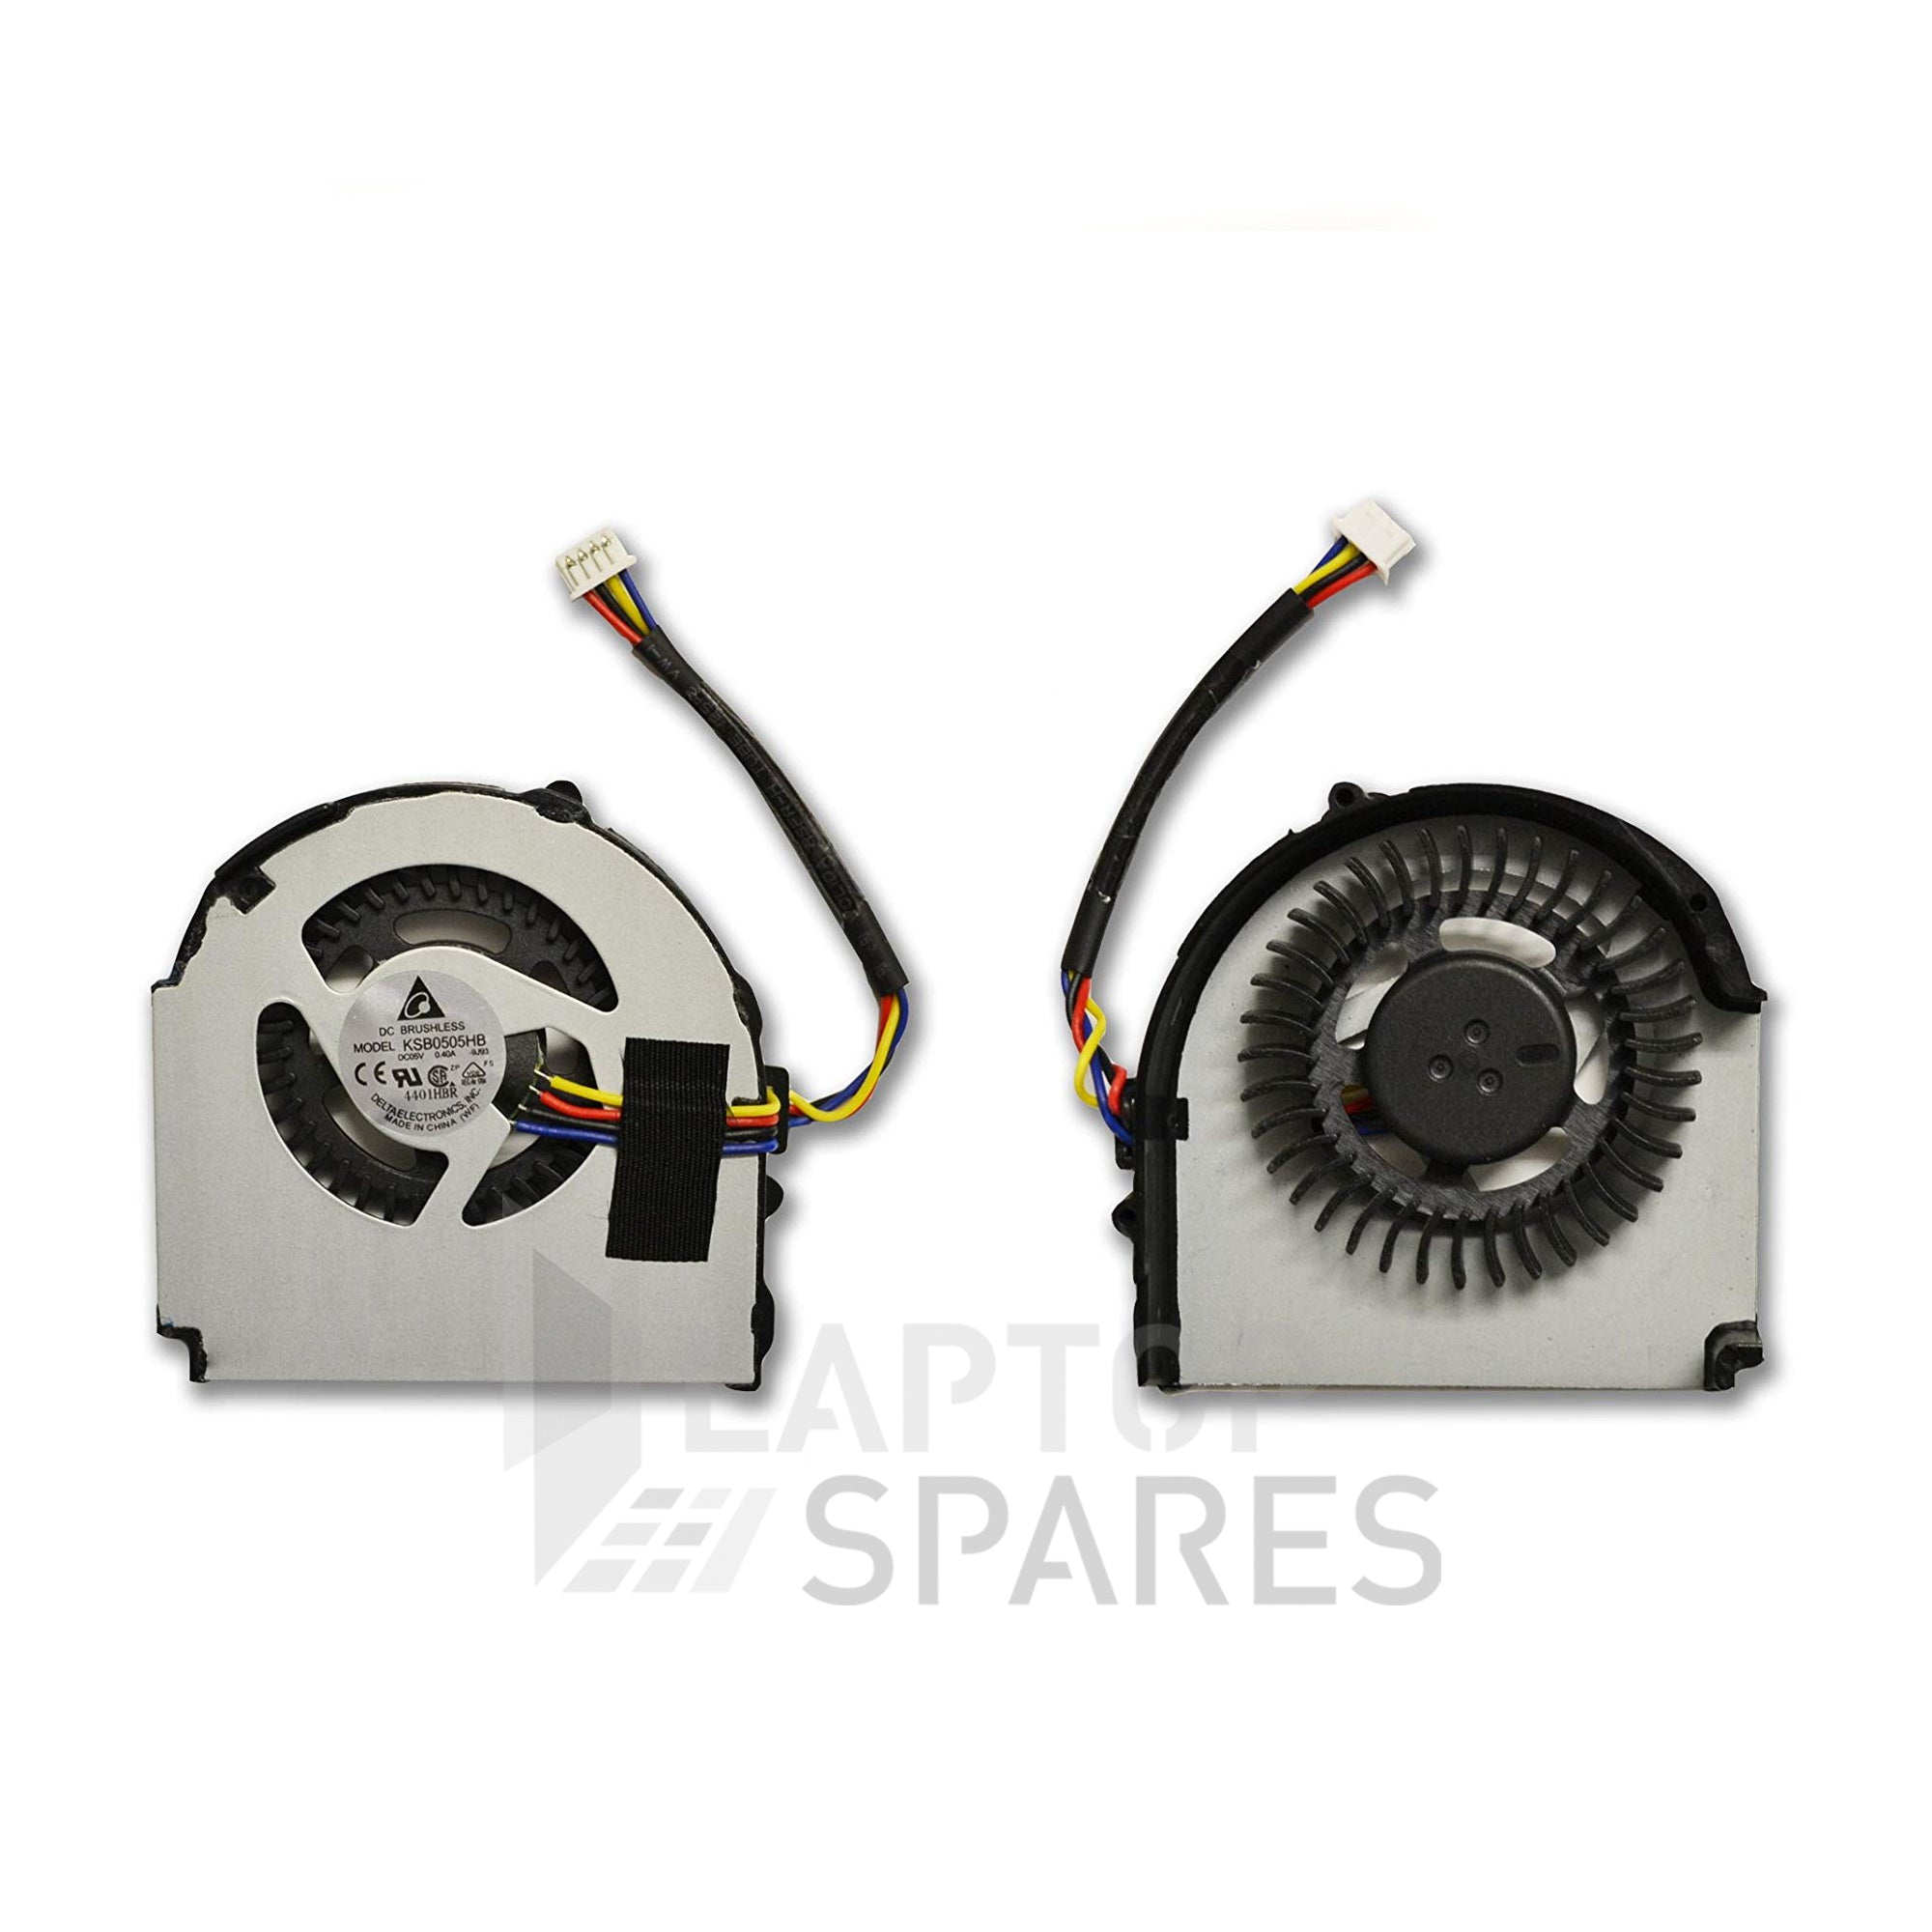 Thinkpad X220s X230 CPU Cooling Fan Price in – Laptop